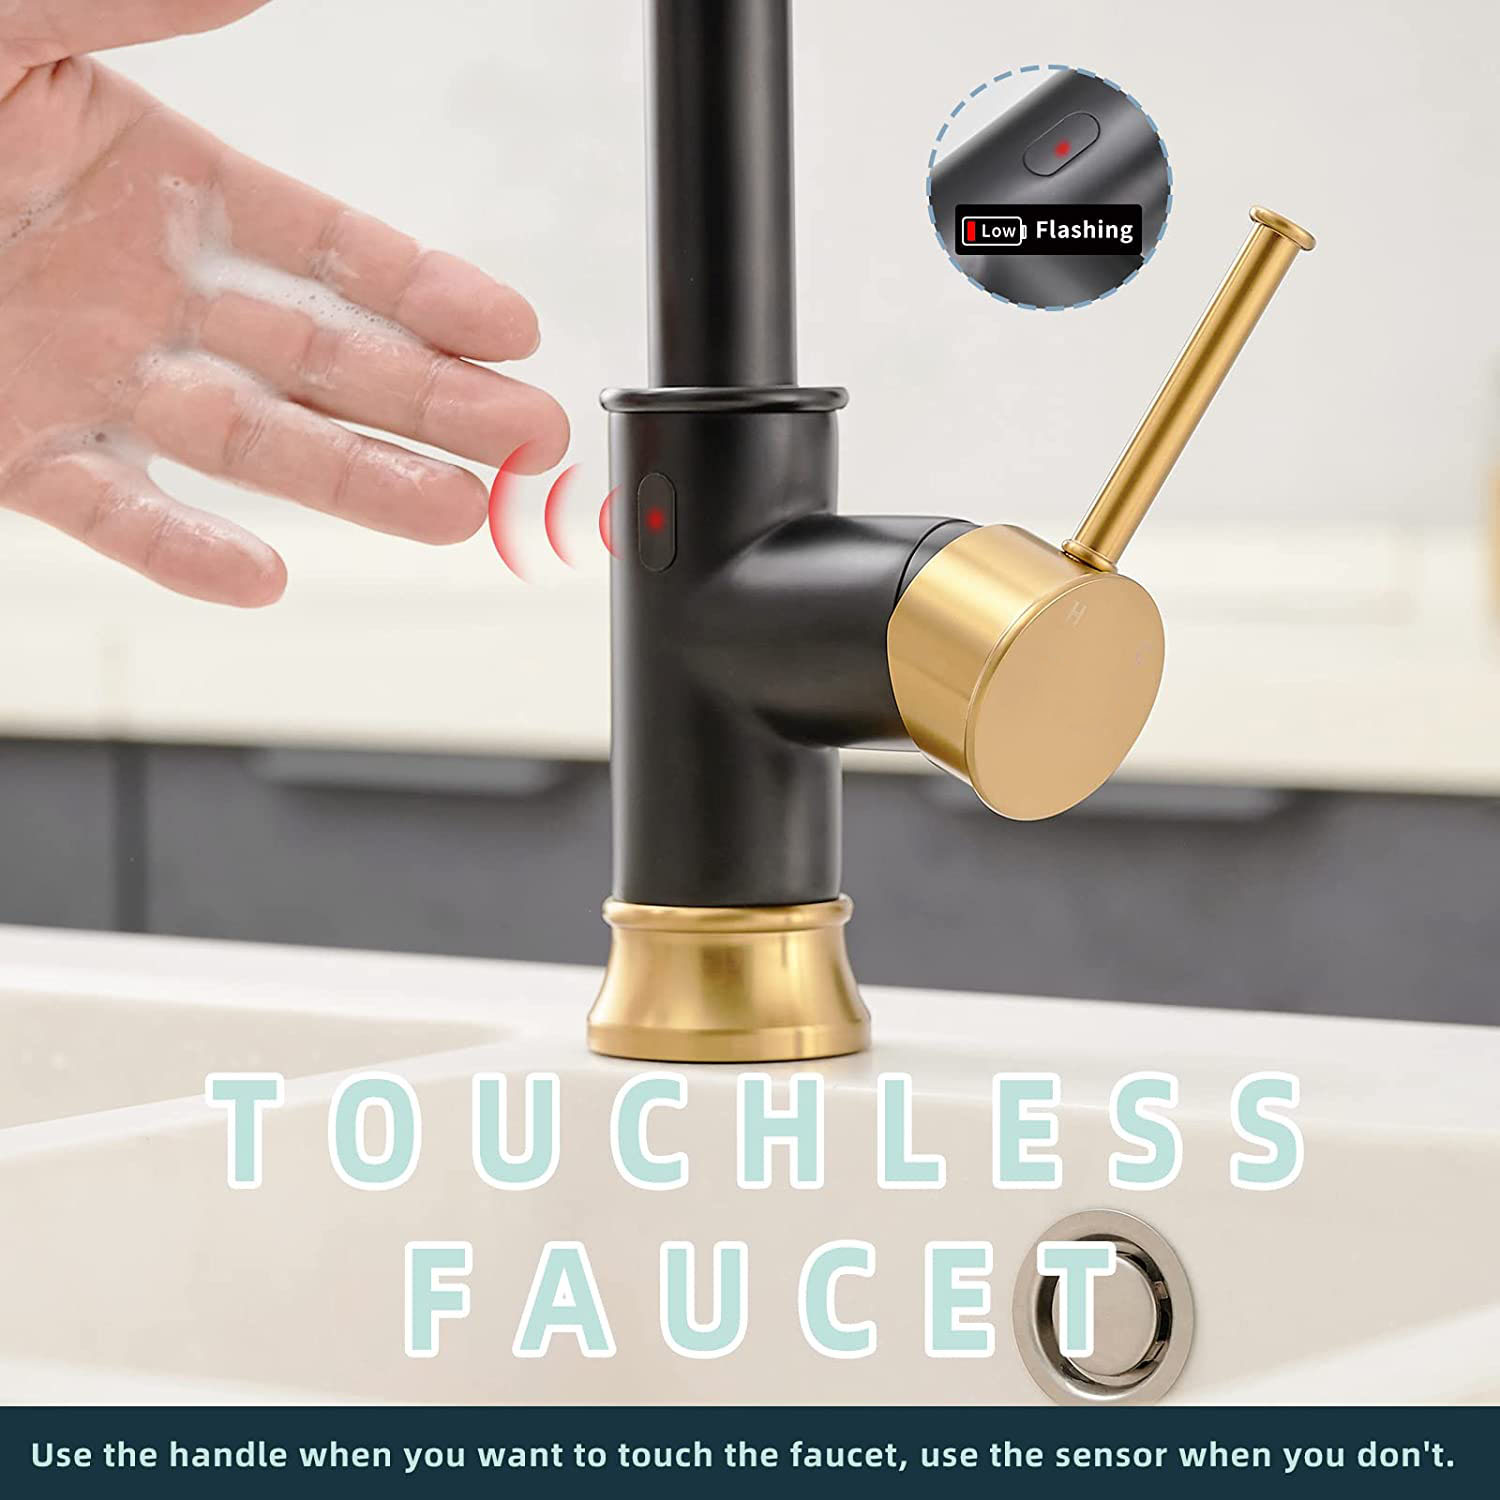 Black Gold Smart Touchless Kitchen Sink Faucet with Pull Down Sprayer, Motion Sensor Activated Hands-Free Single Handle Kitchen Faucet.